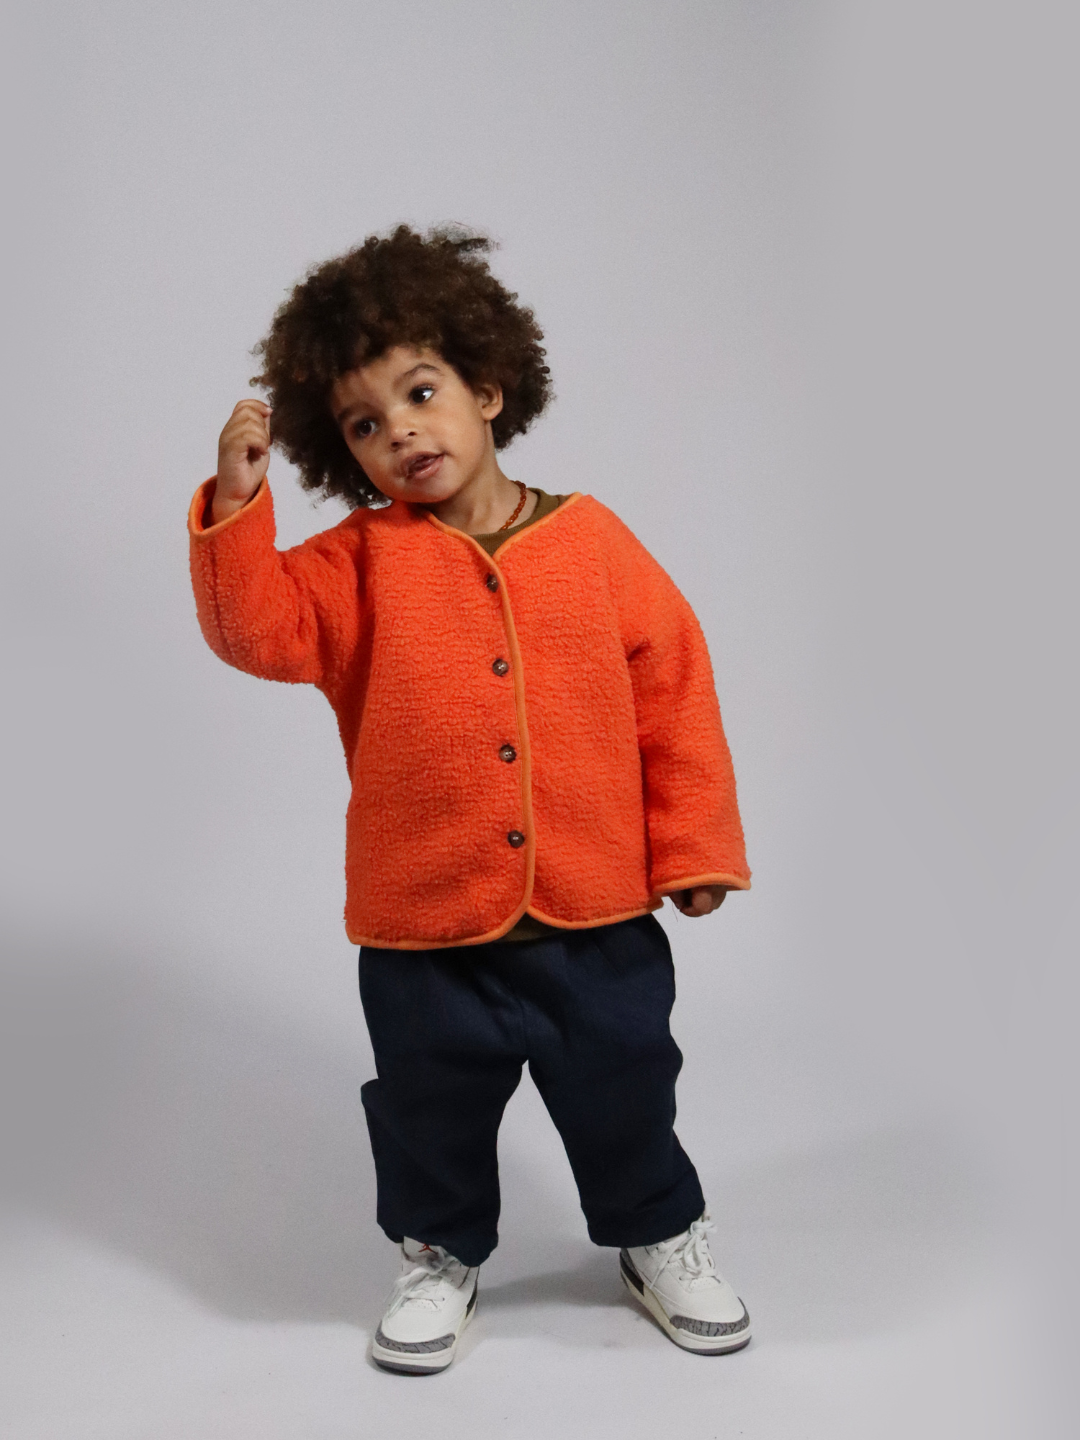 A toddler wearing an orange collarless fleece jacket with four brown buttons, with dark blue pants and white sneakers, standing on a light grey background.